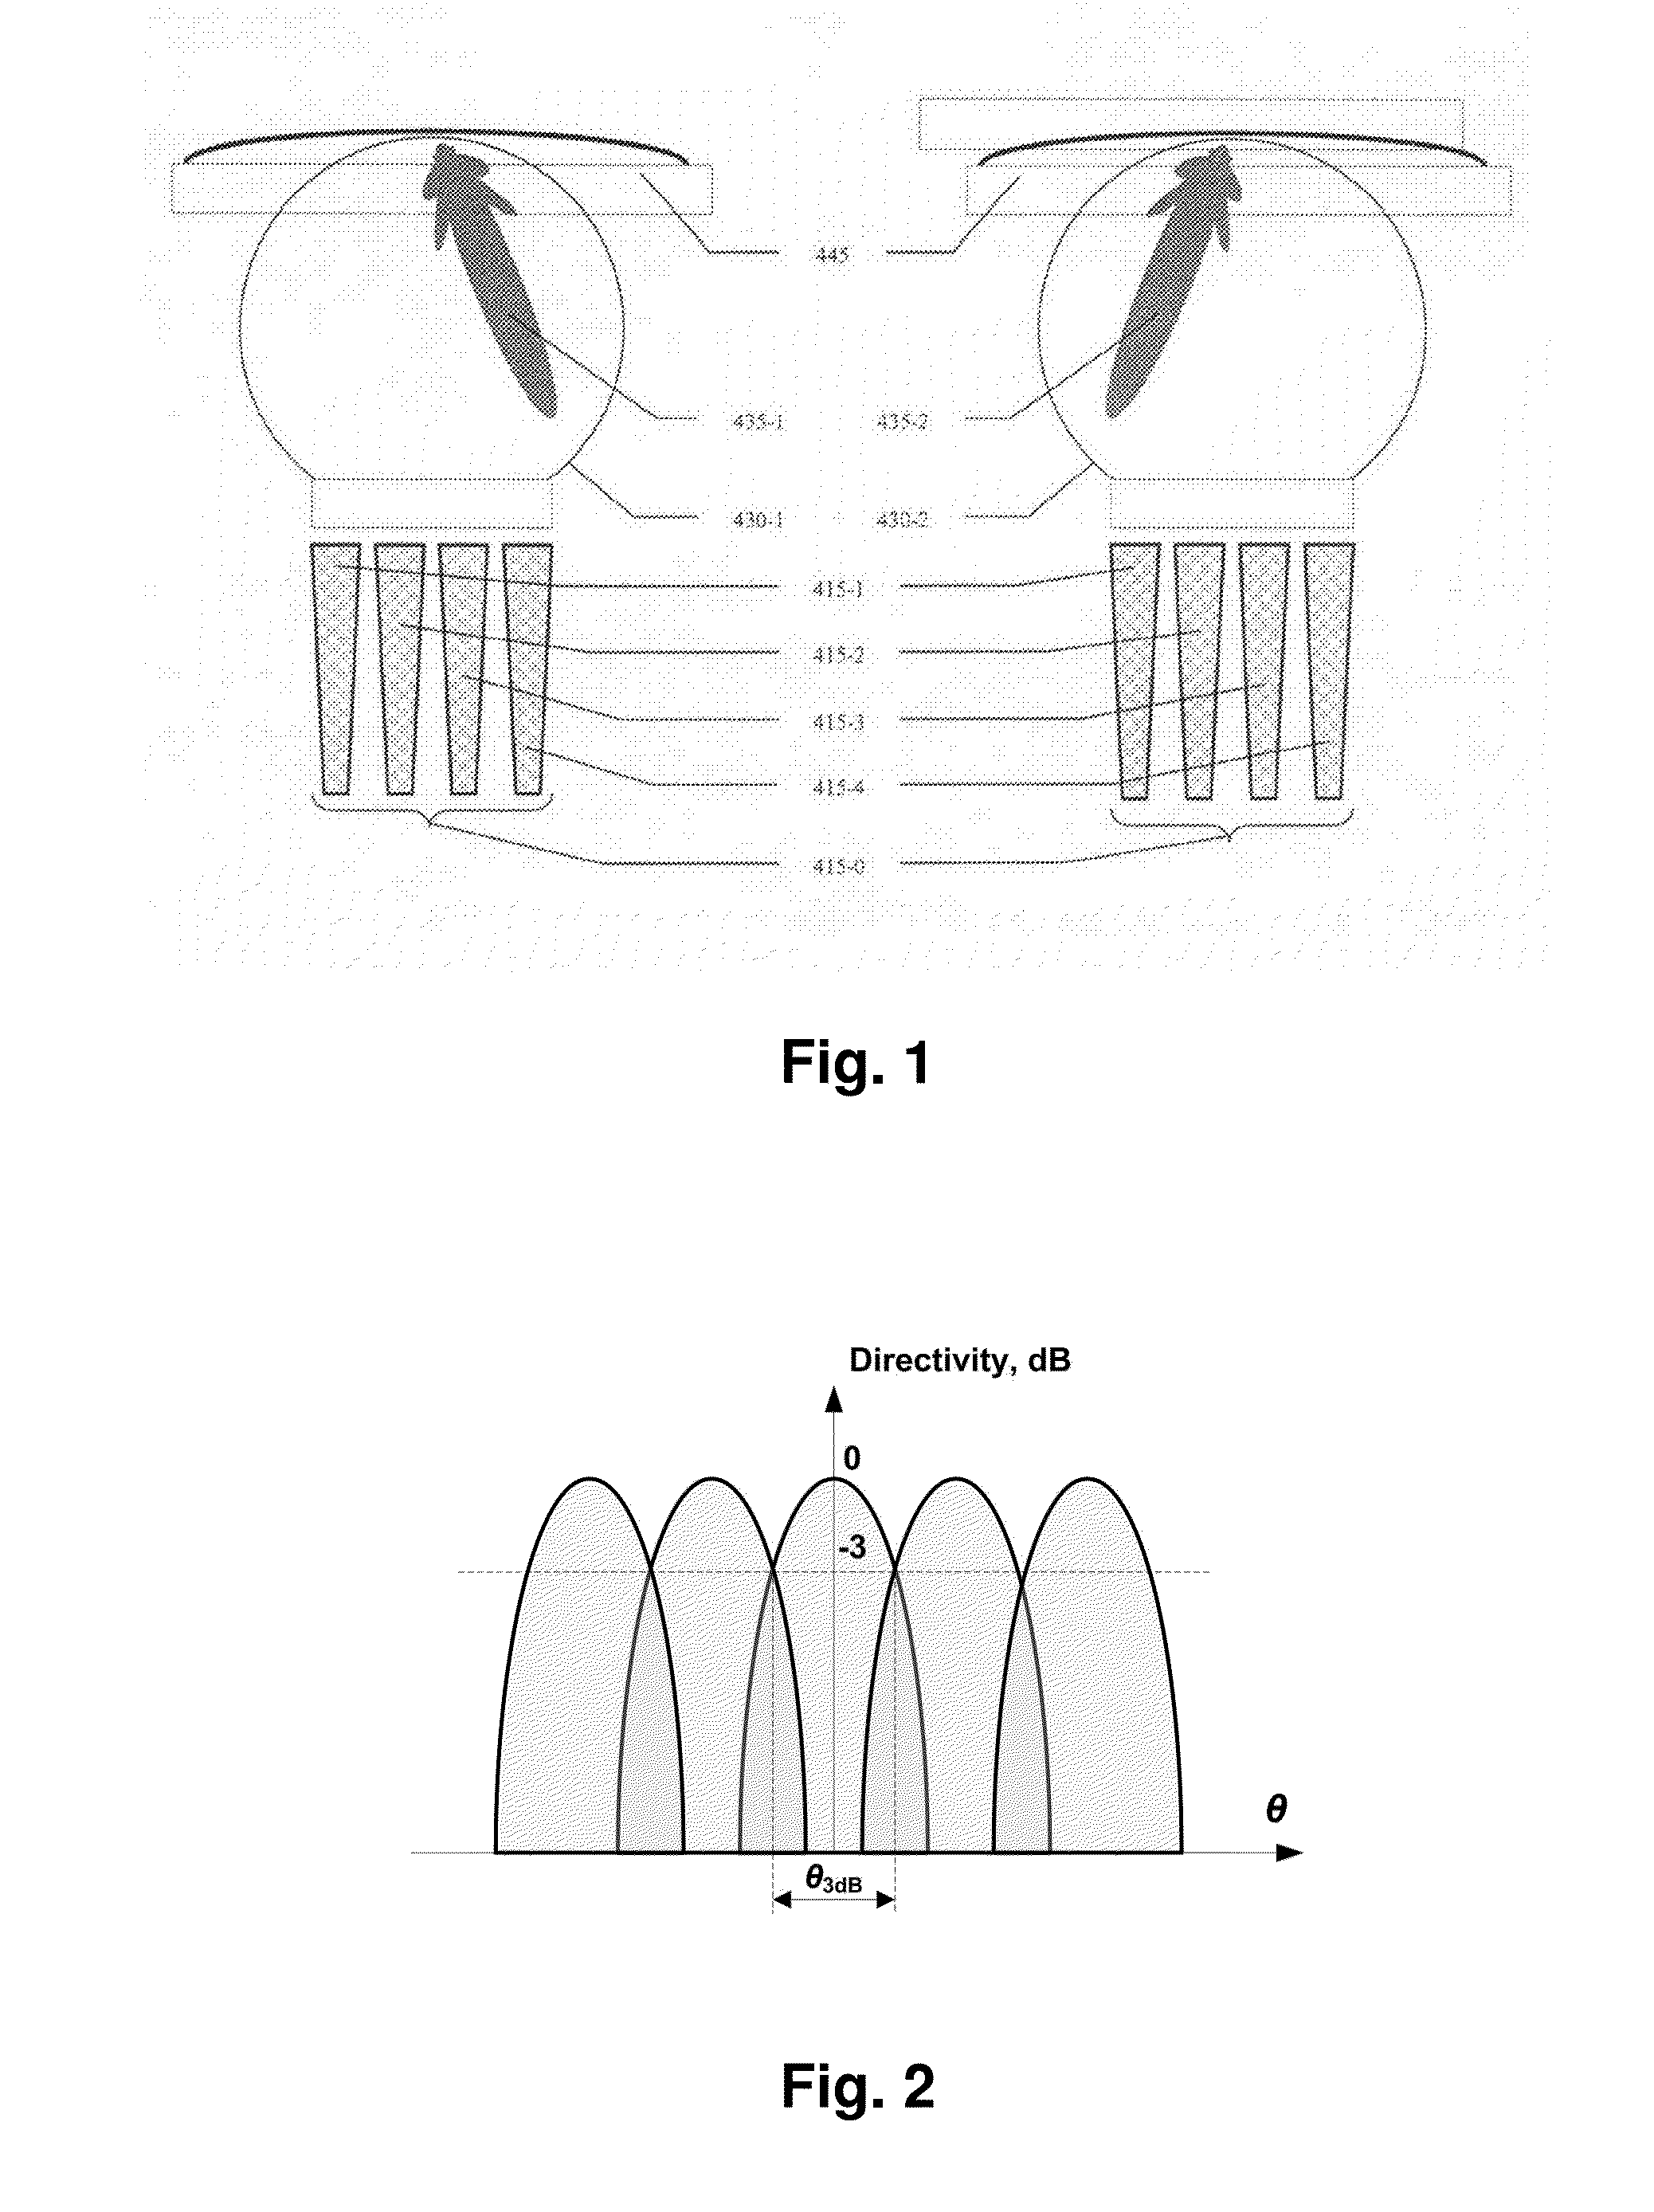 Lens antenna with electronic beam steering capabilities